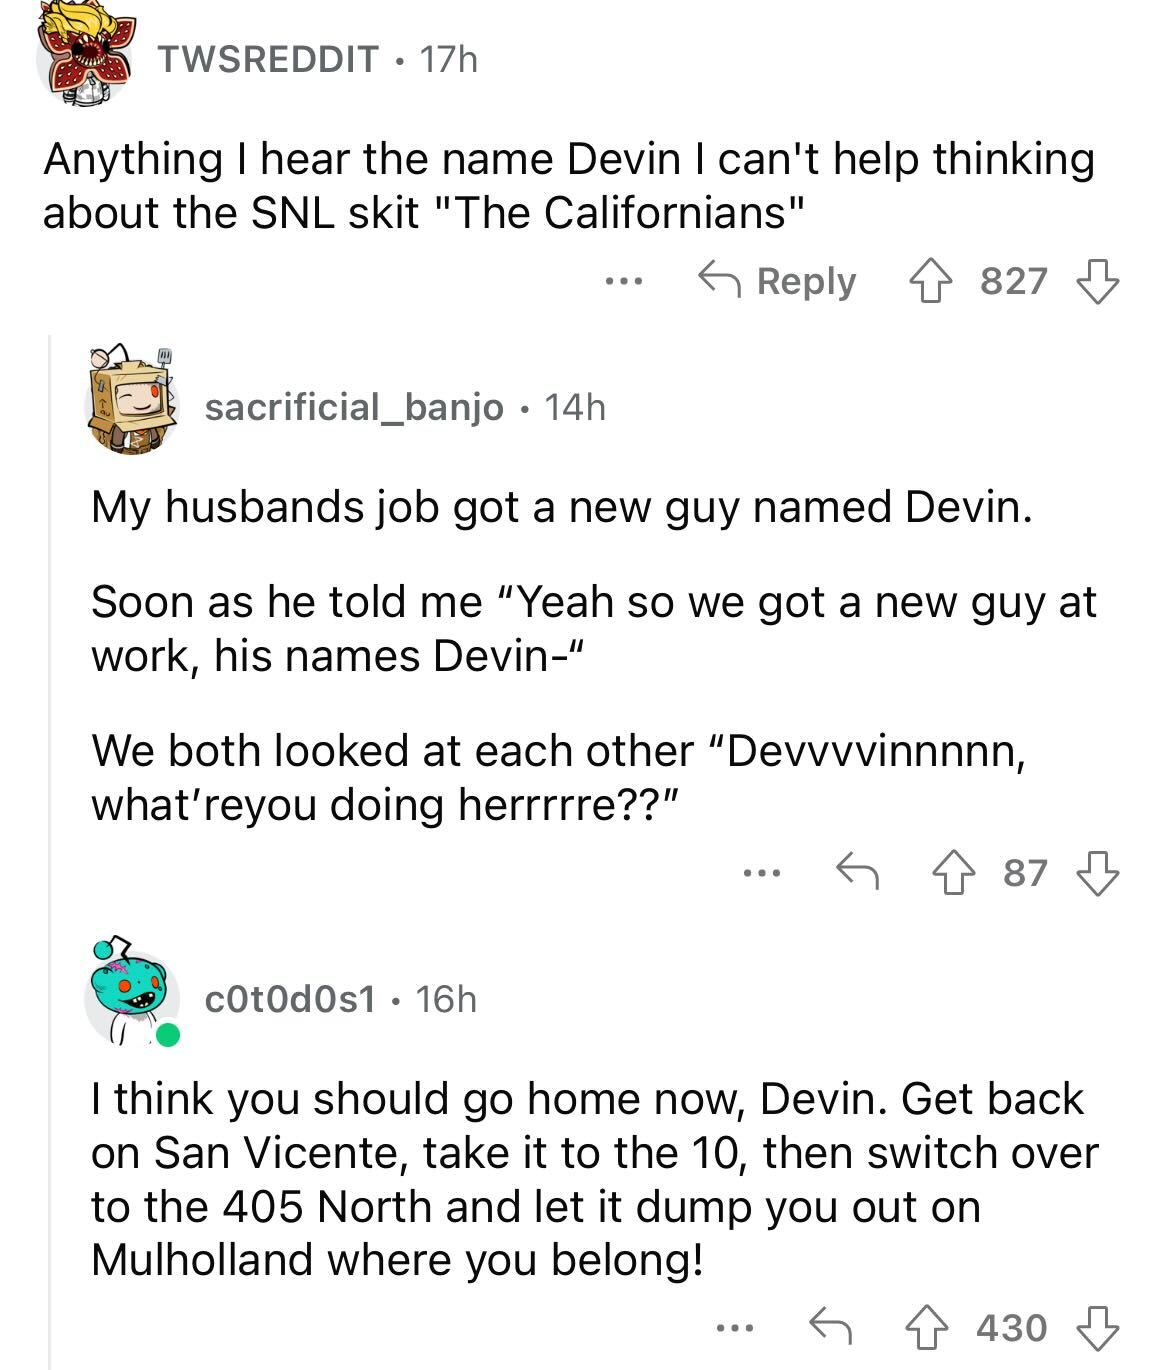 names that were ruined because of someone - angle - Twsreddit. 17h Anything I hear the e Devin I can't help thinking about the Snl skit "The Californians" ... c0t0d0s1. 16h sacrificial_banjo . 14h My husbands job got a new guy named Devin. Soon as he told